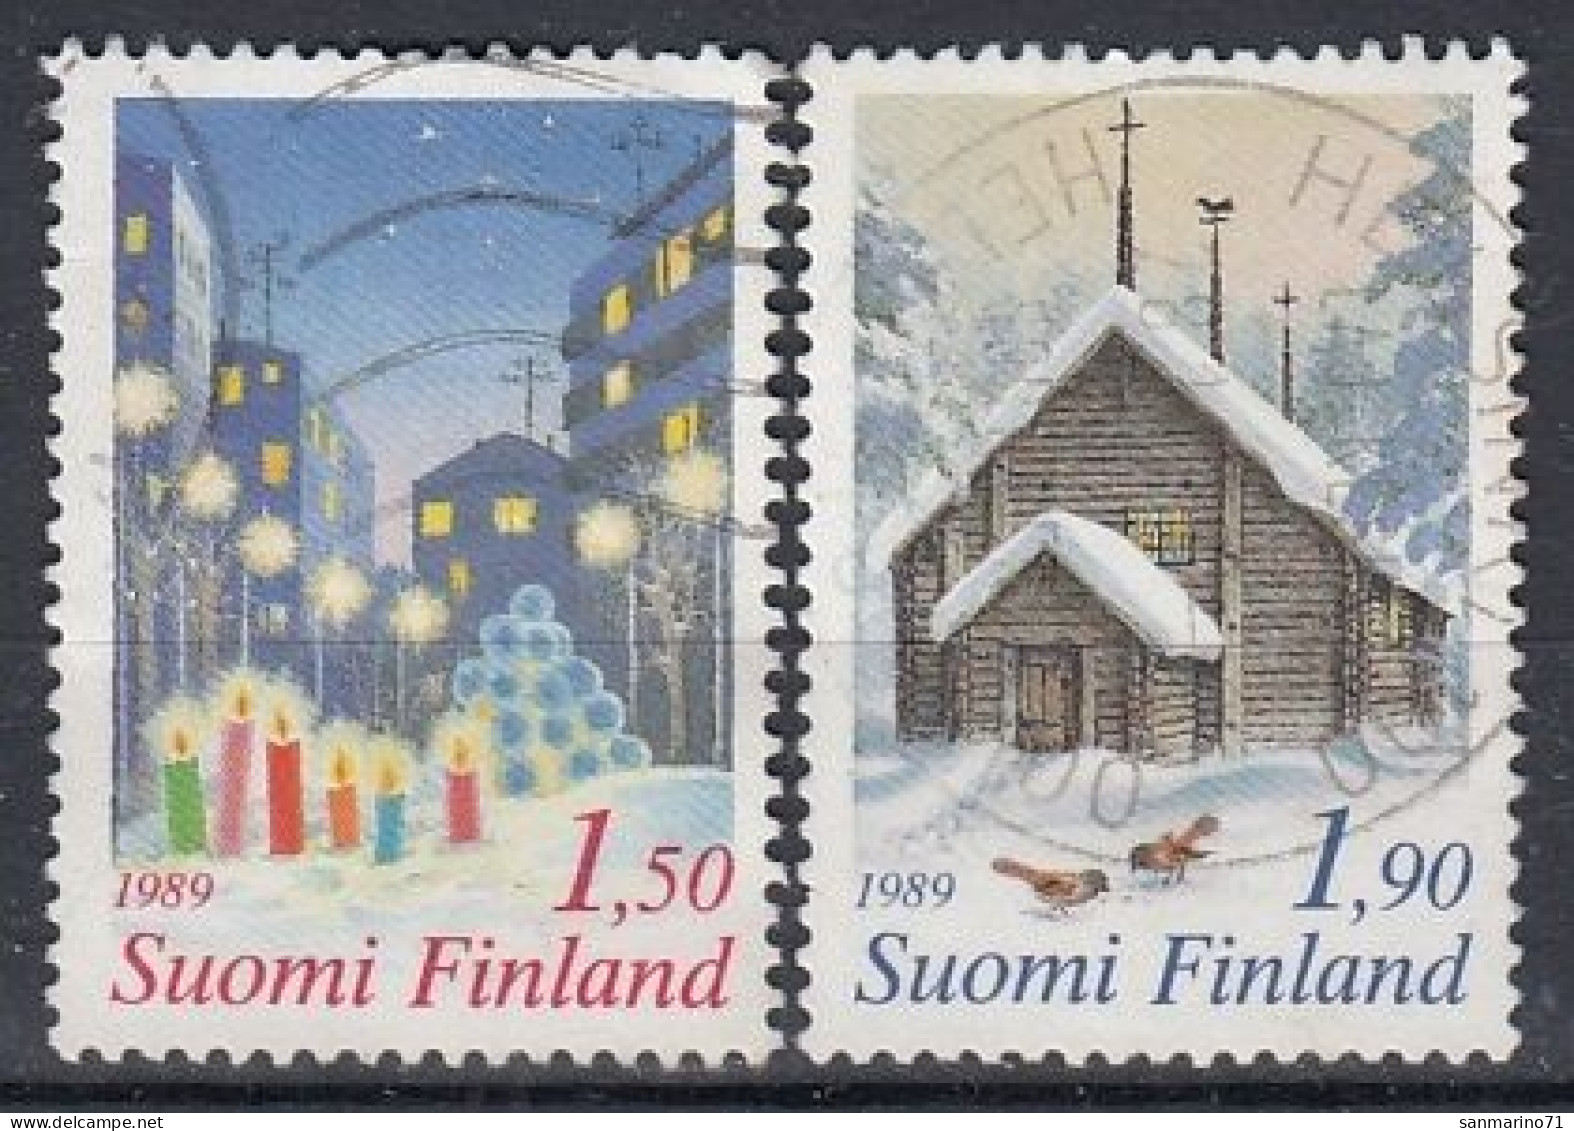 FINLAND 1096-1097,used,falc Hinged - Used Stamps